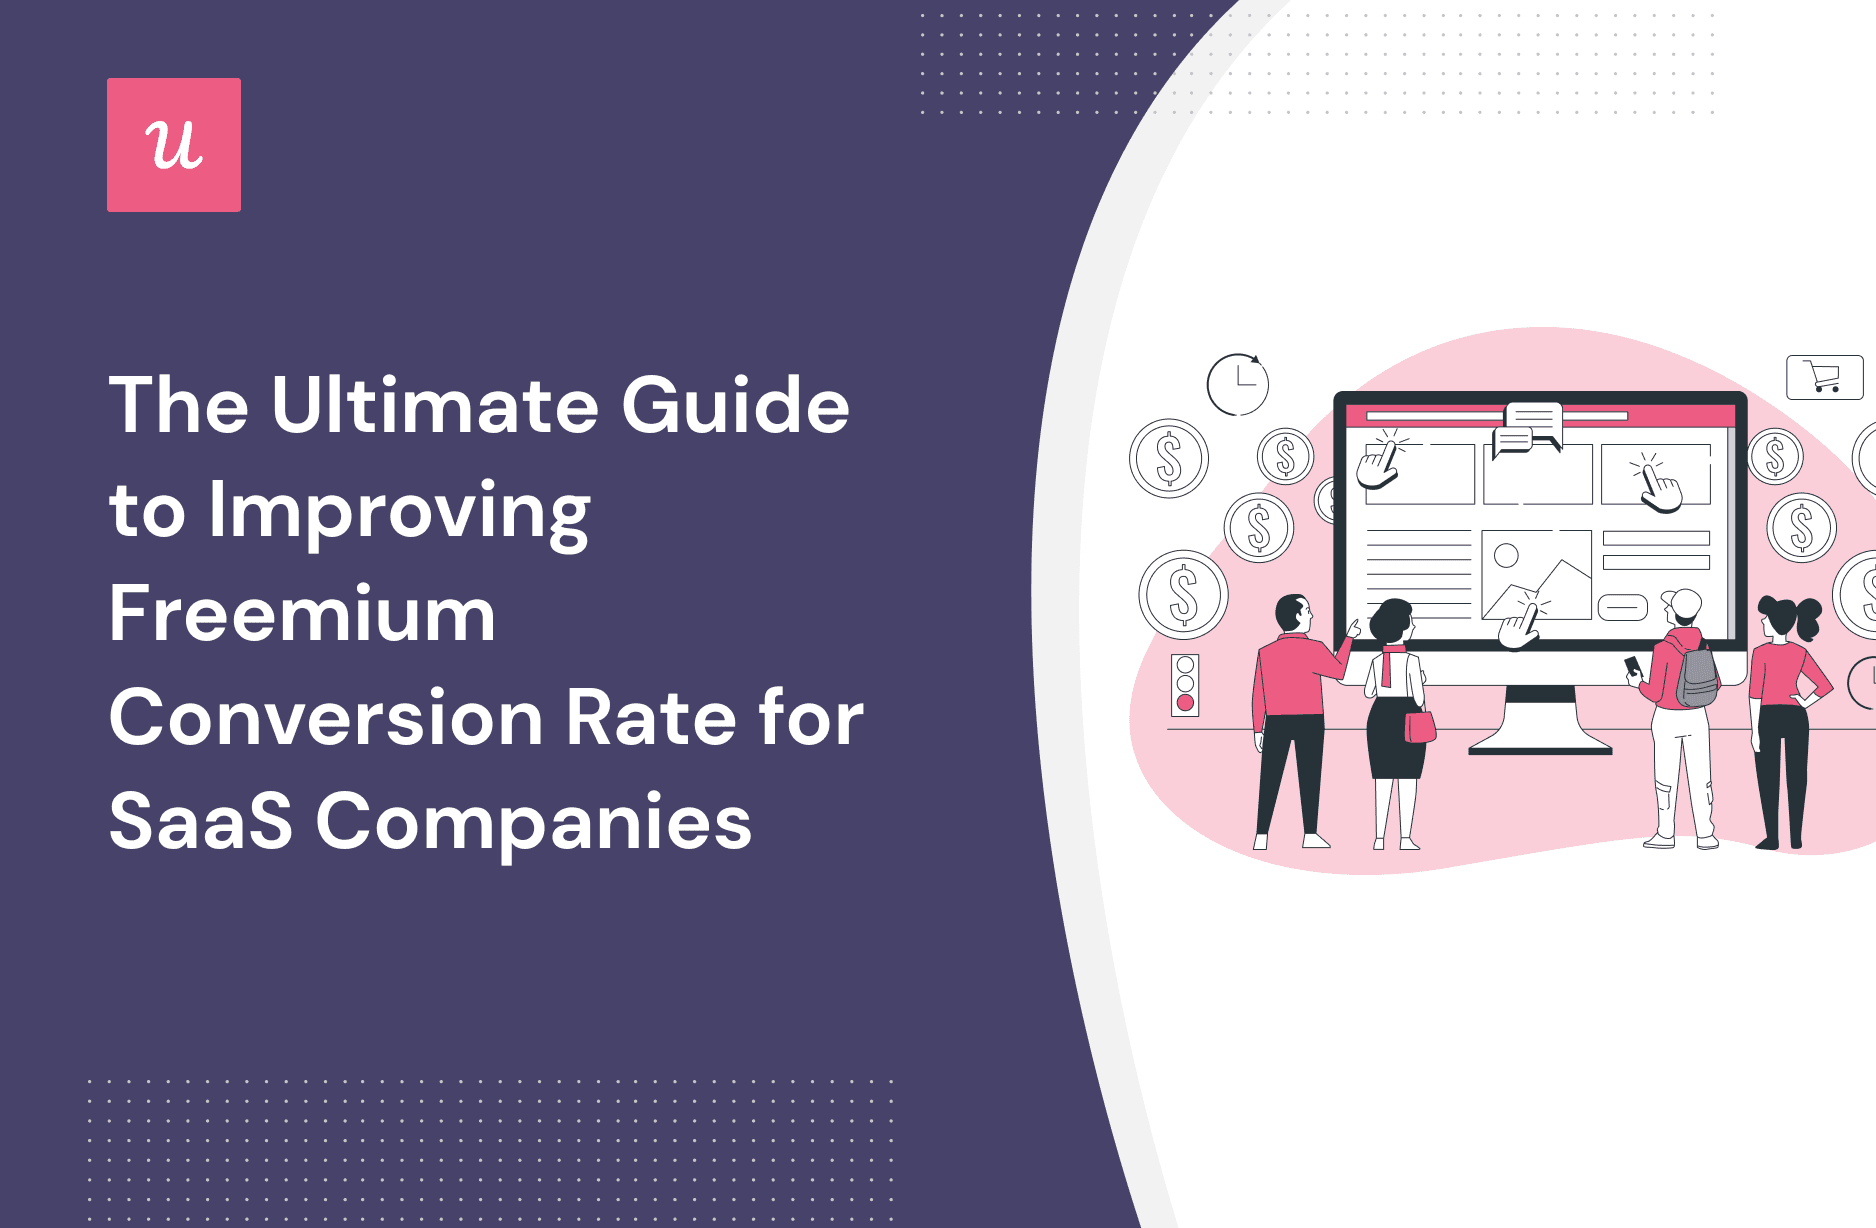 The Ultimate Guide to Improving Freemium Conversion Rate for SaaS Companies cover